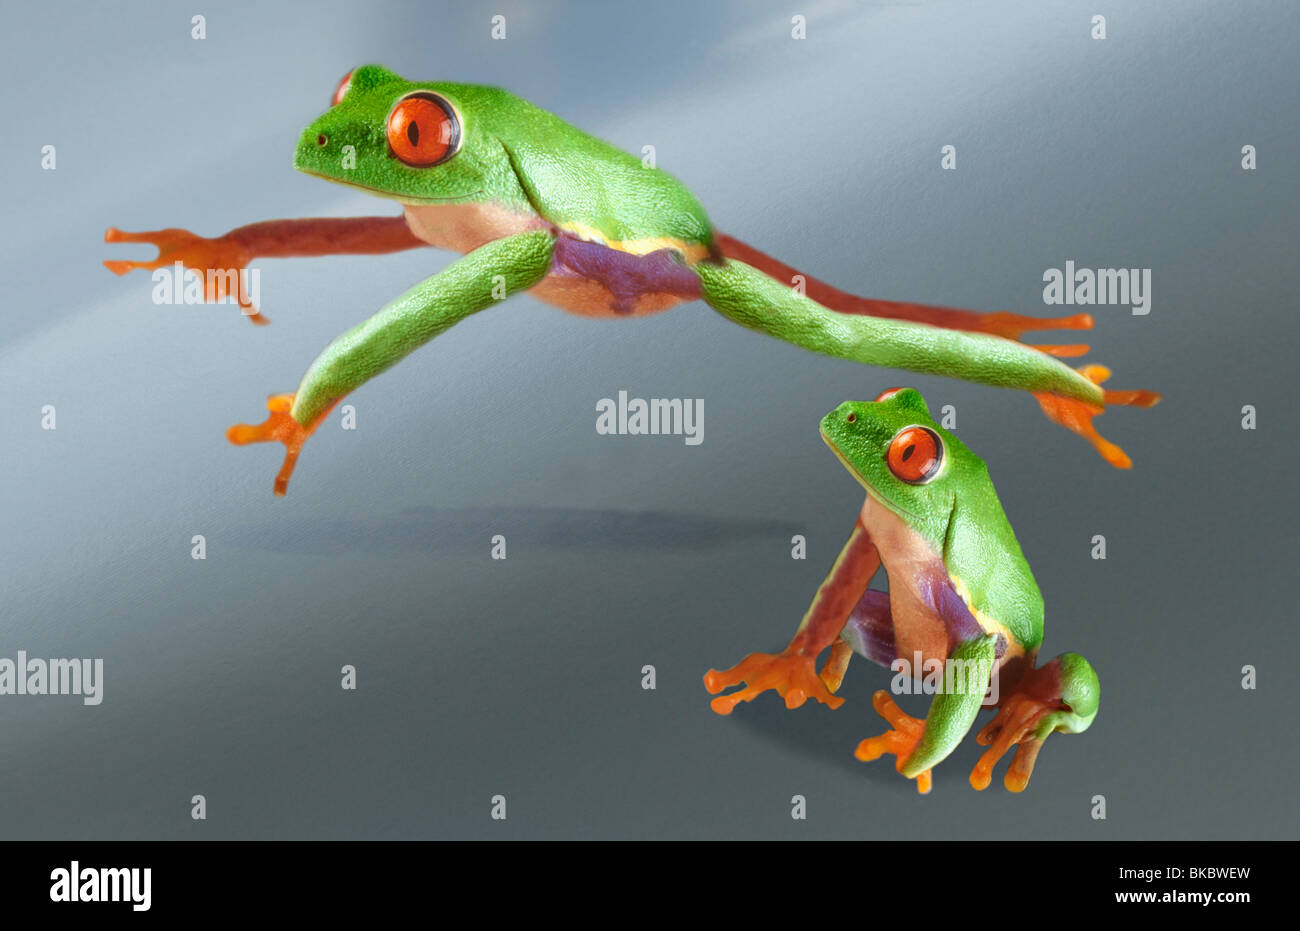 Frogs playing leapfrog Stock Photo